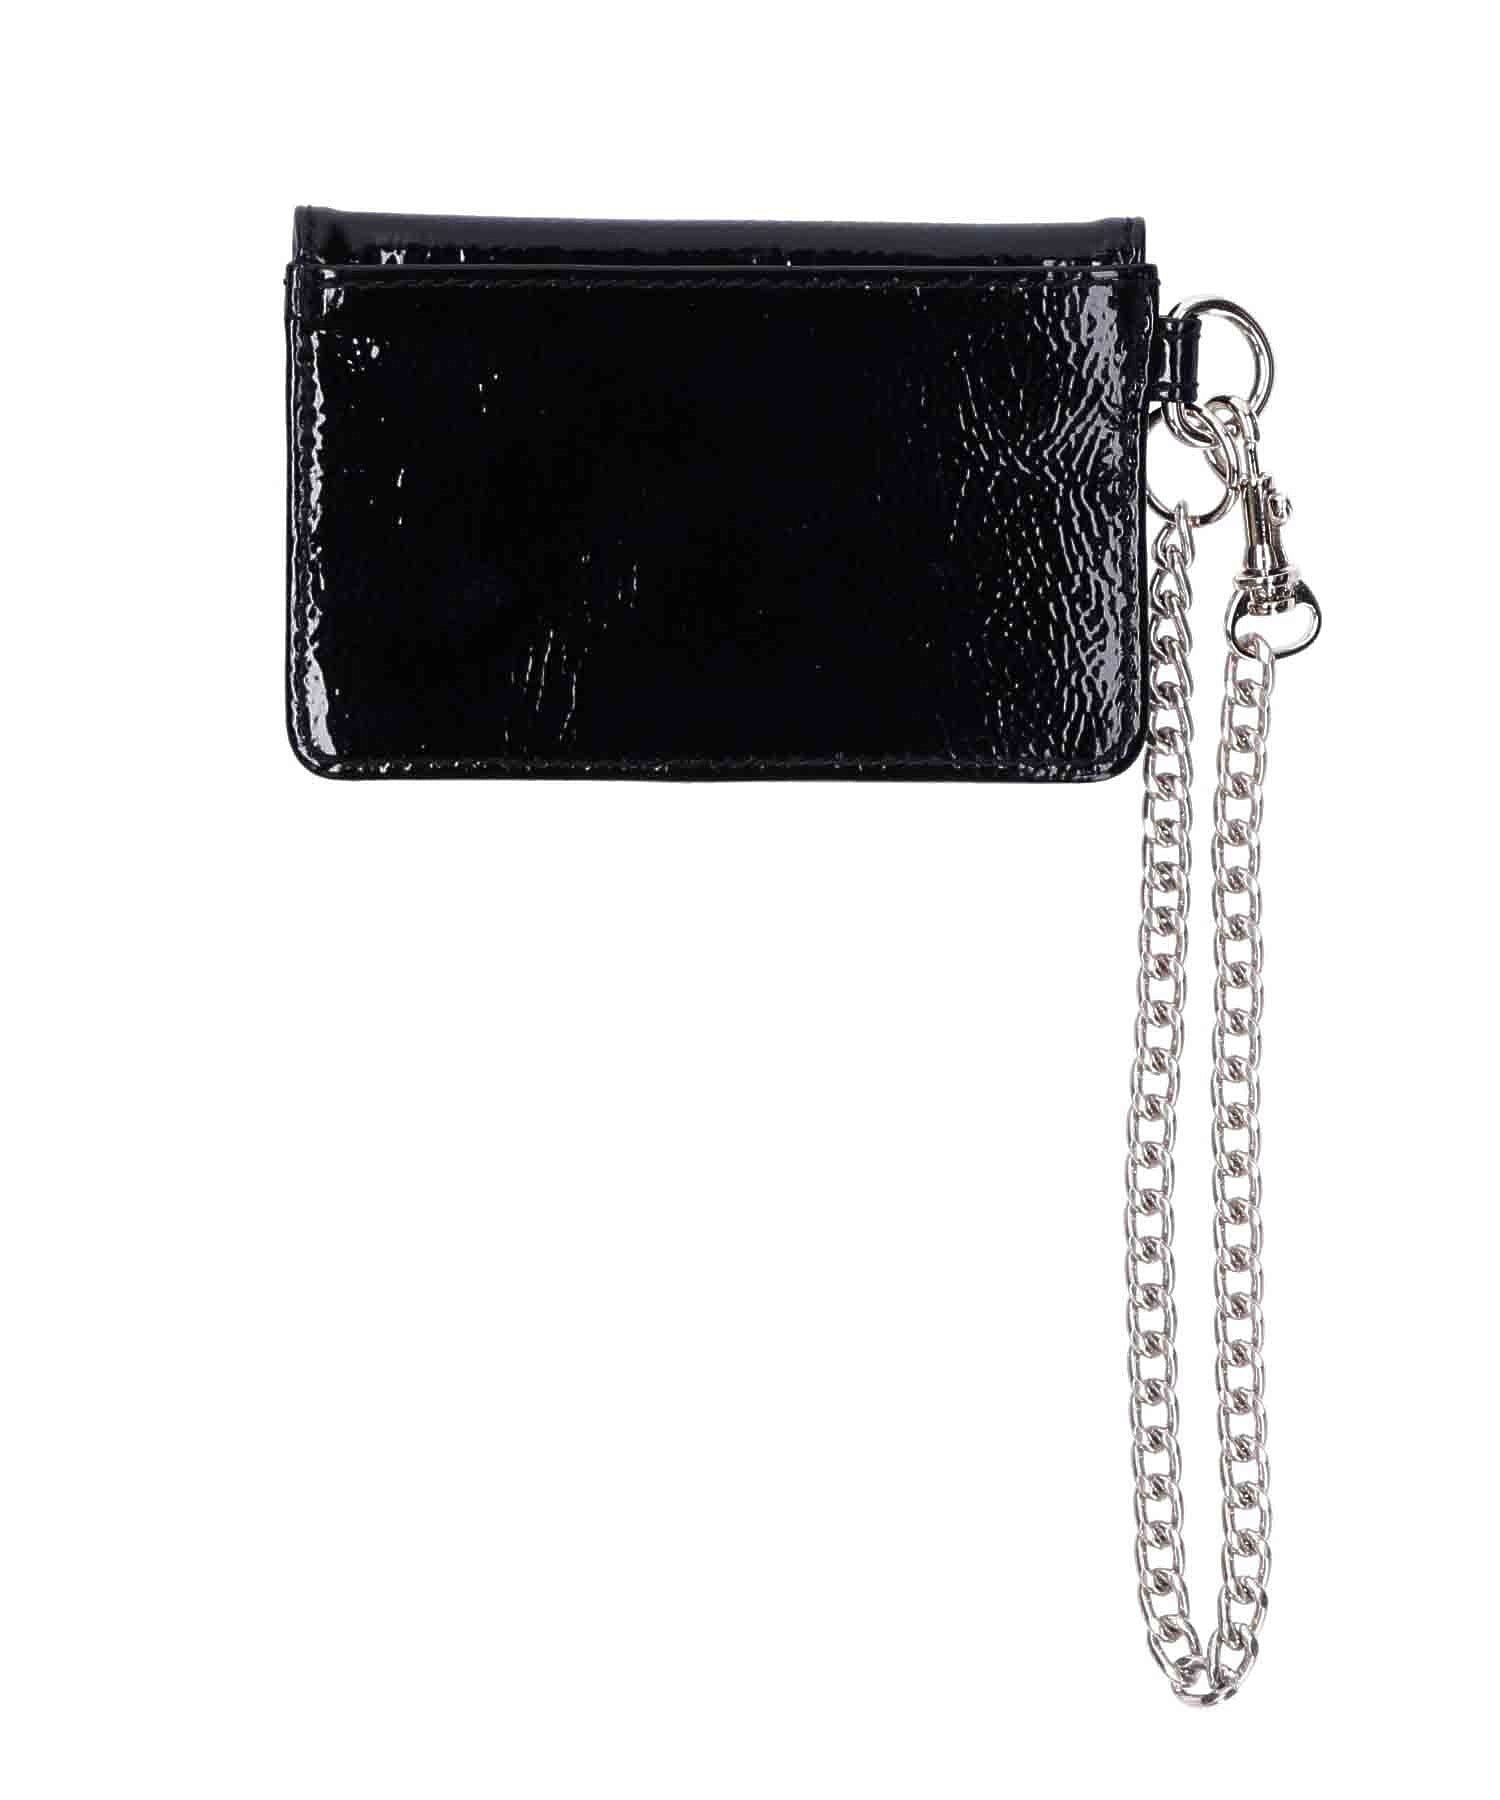 FAUX PATENT LEATHER CARD CASE X-girl